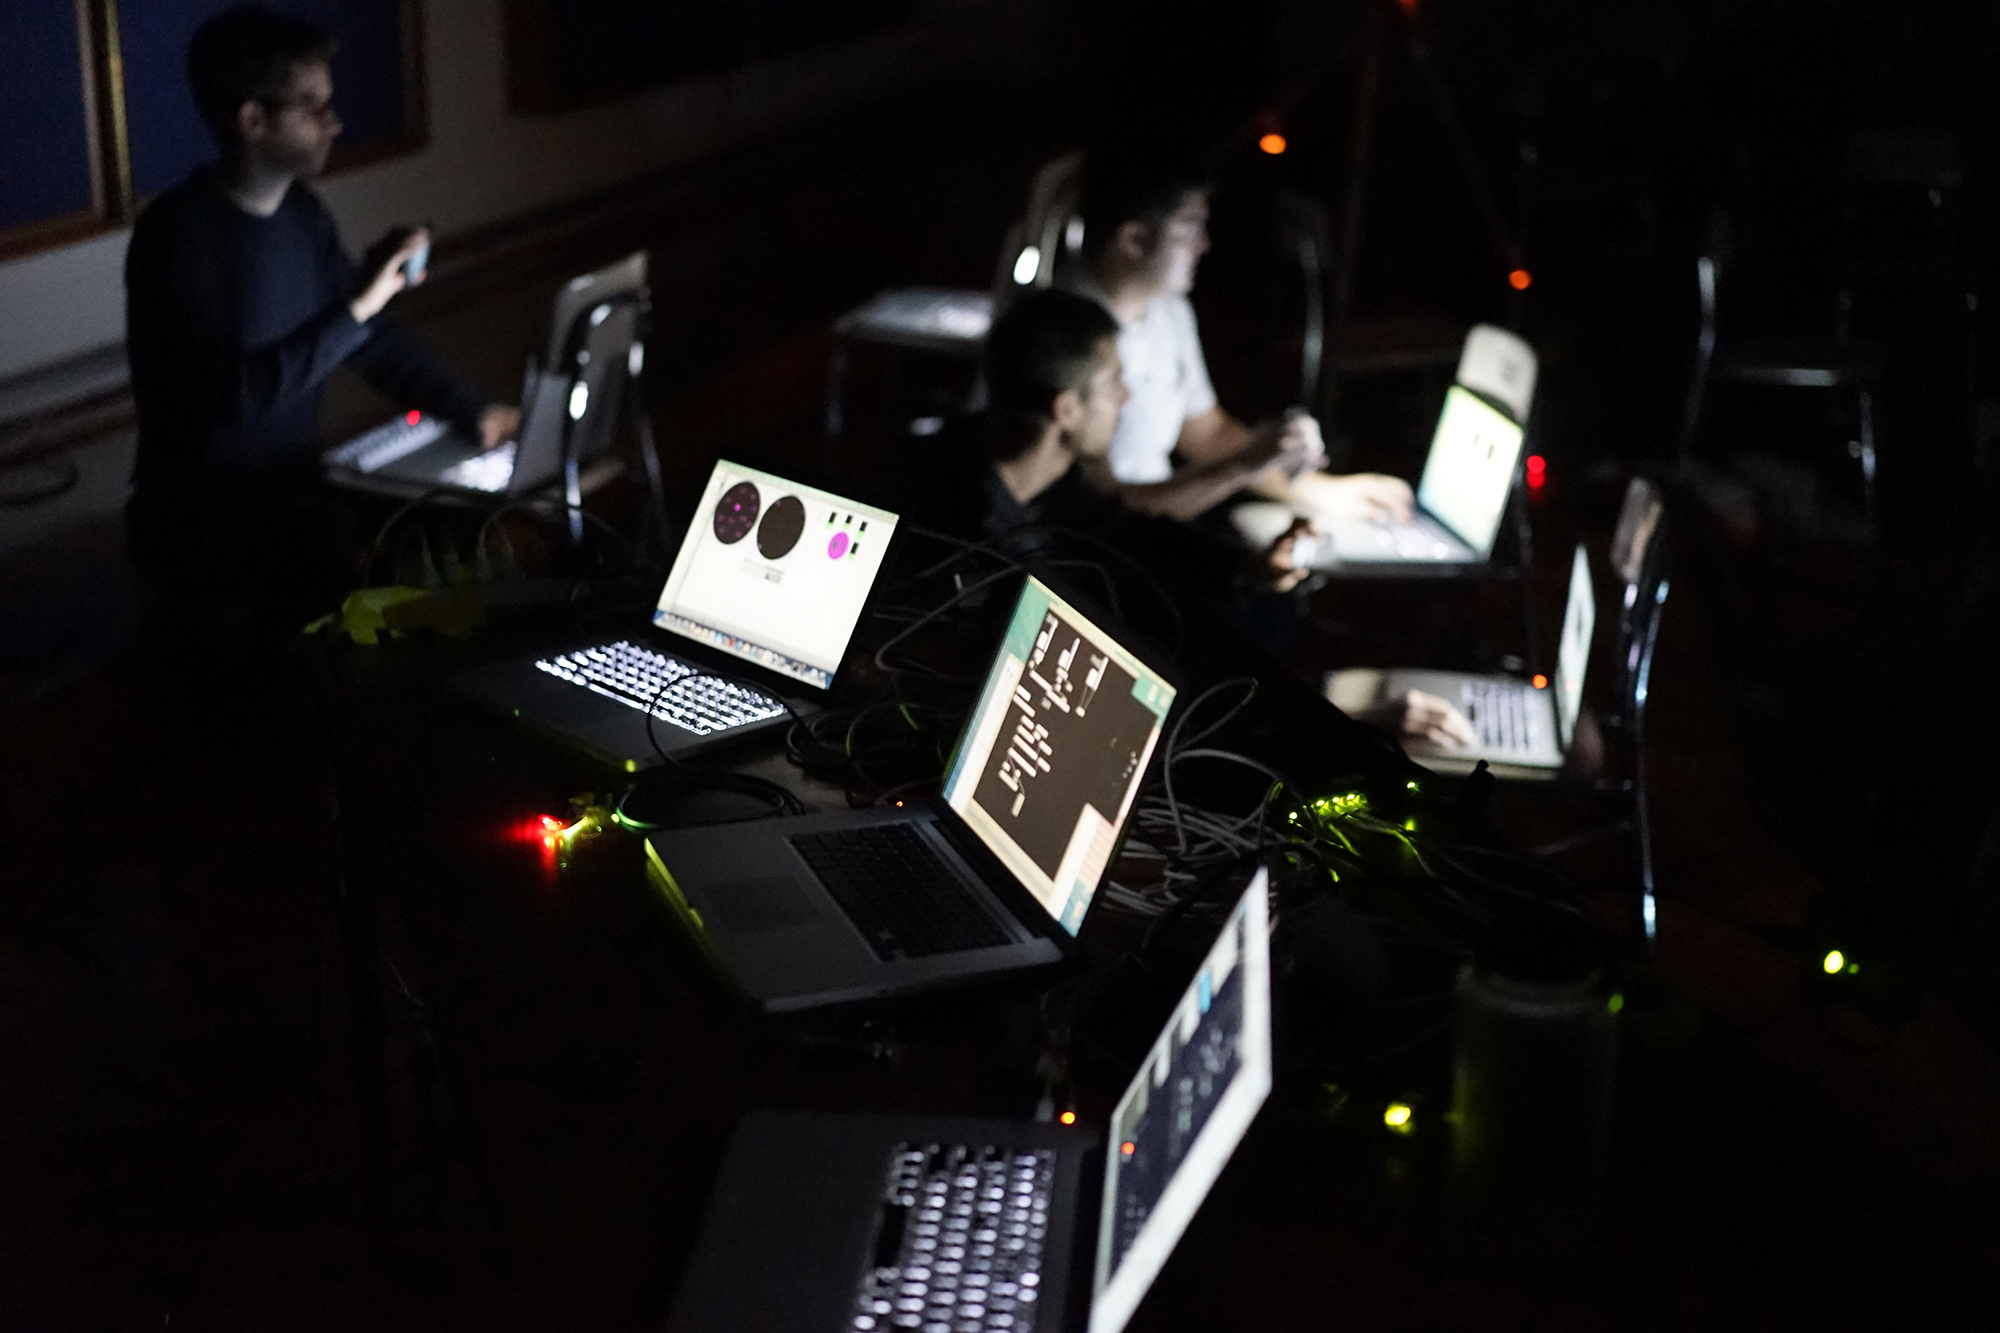 laptops arranged like an orchestra